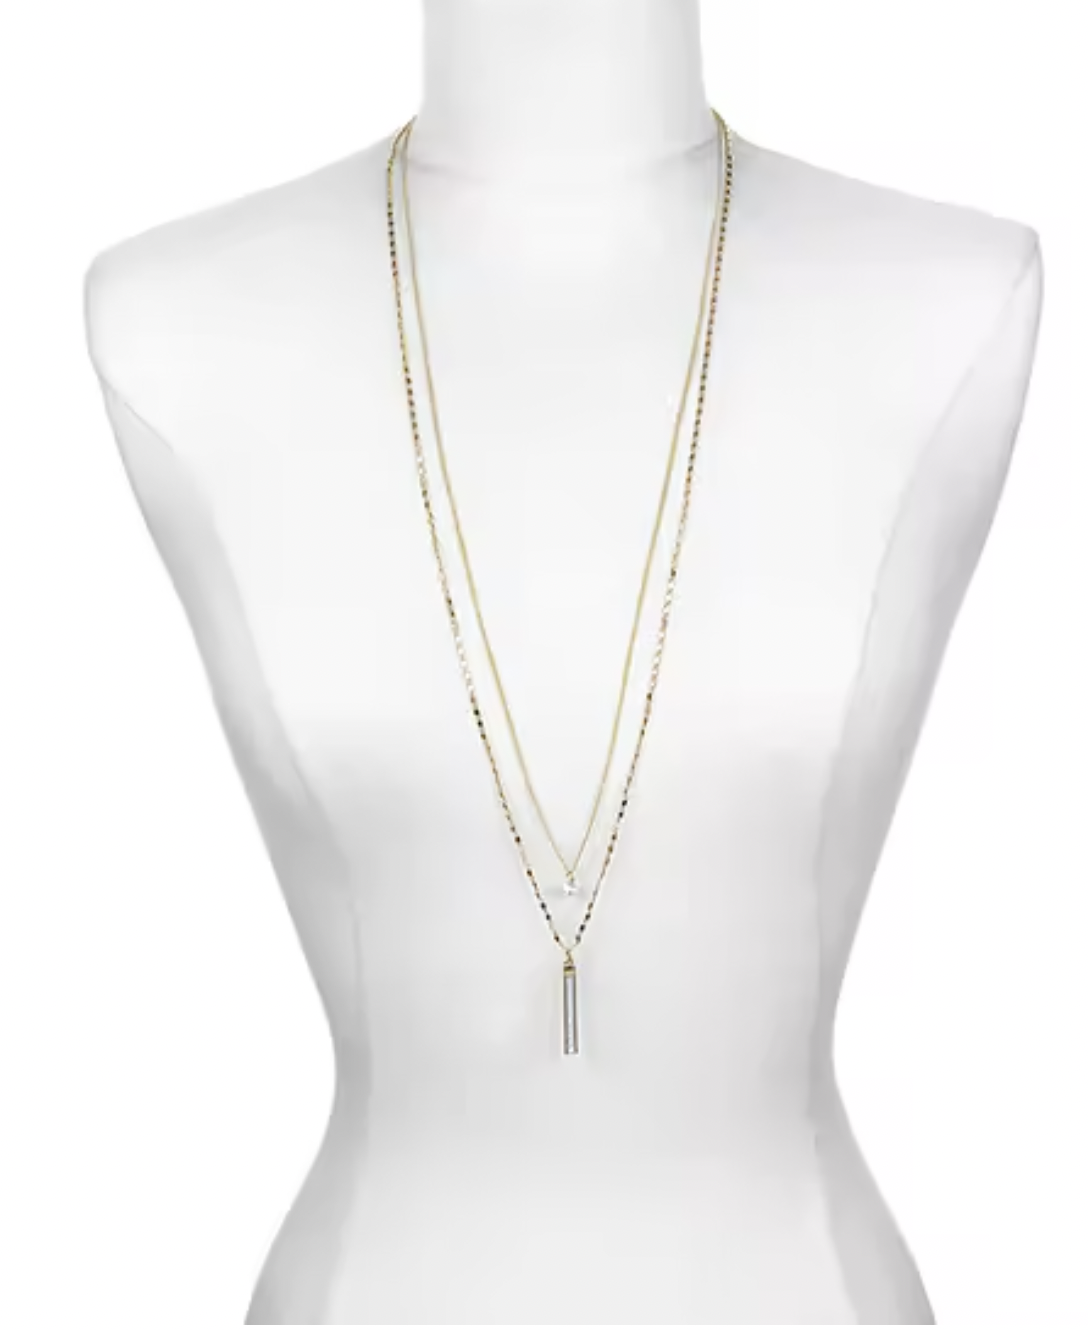 Bijoux Bar 30 Inch Bar Strand Necklace at JCPenney